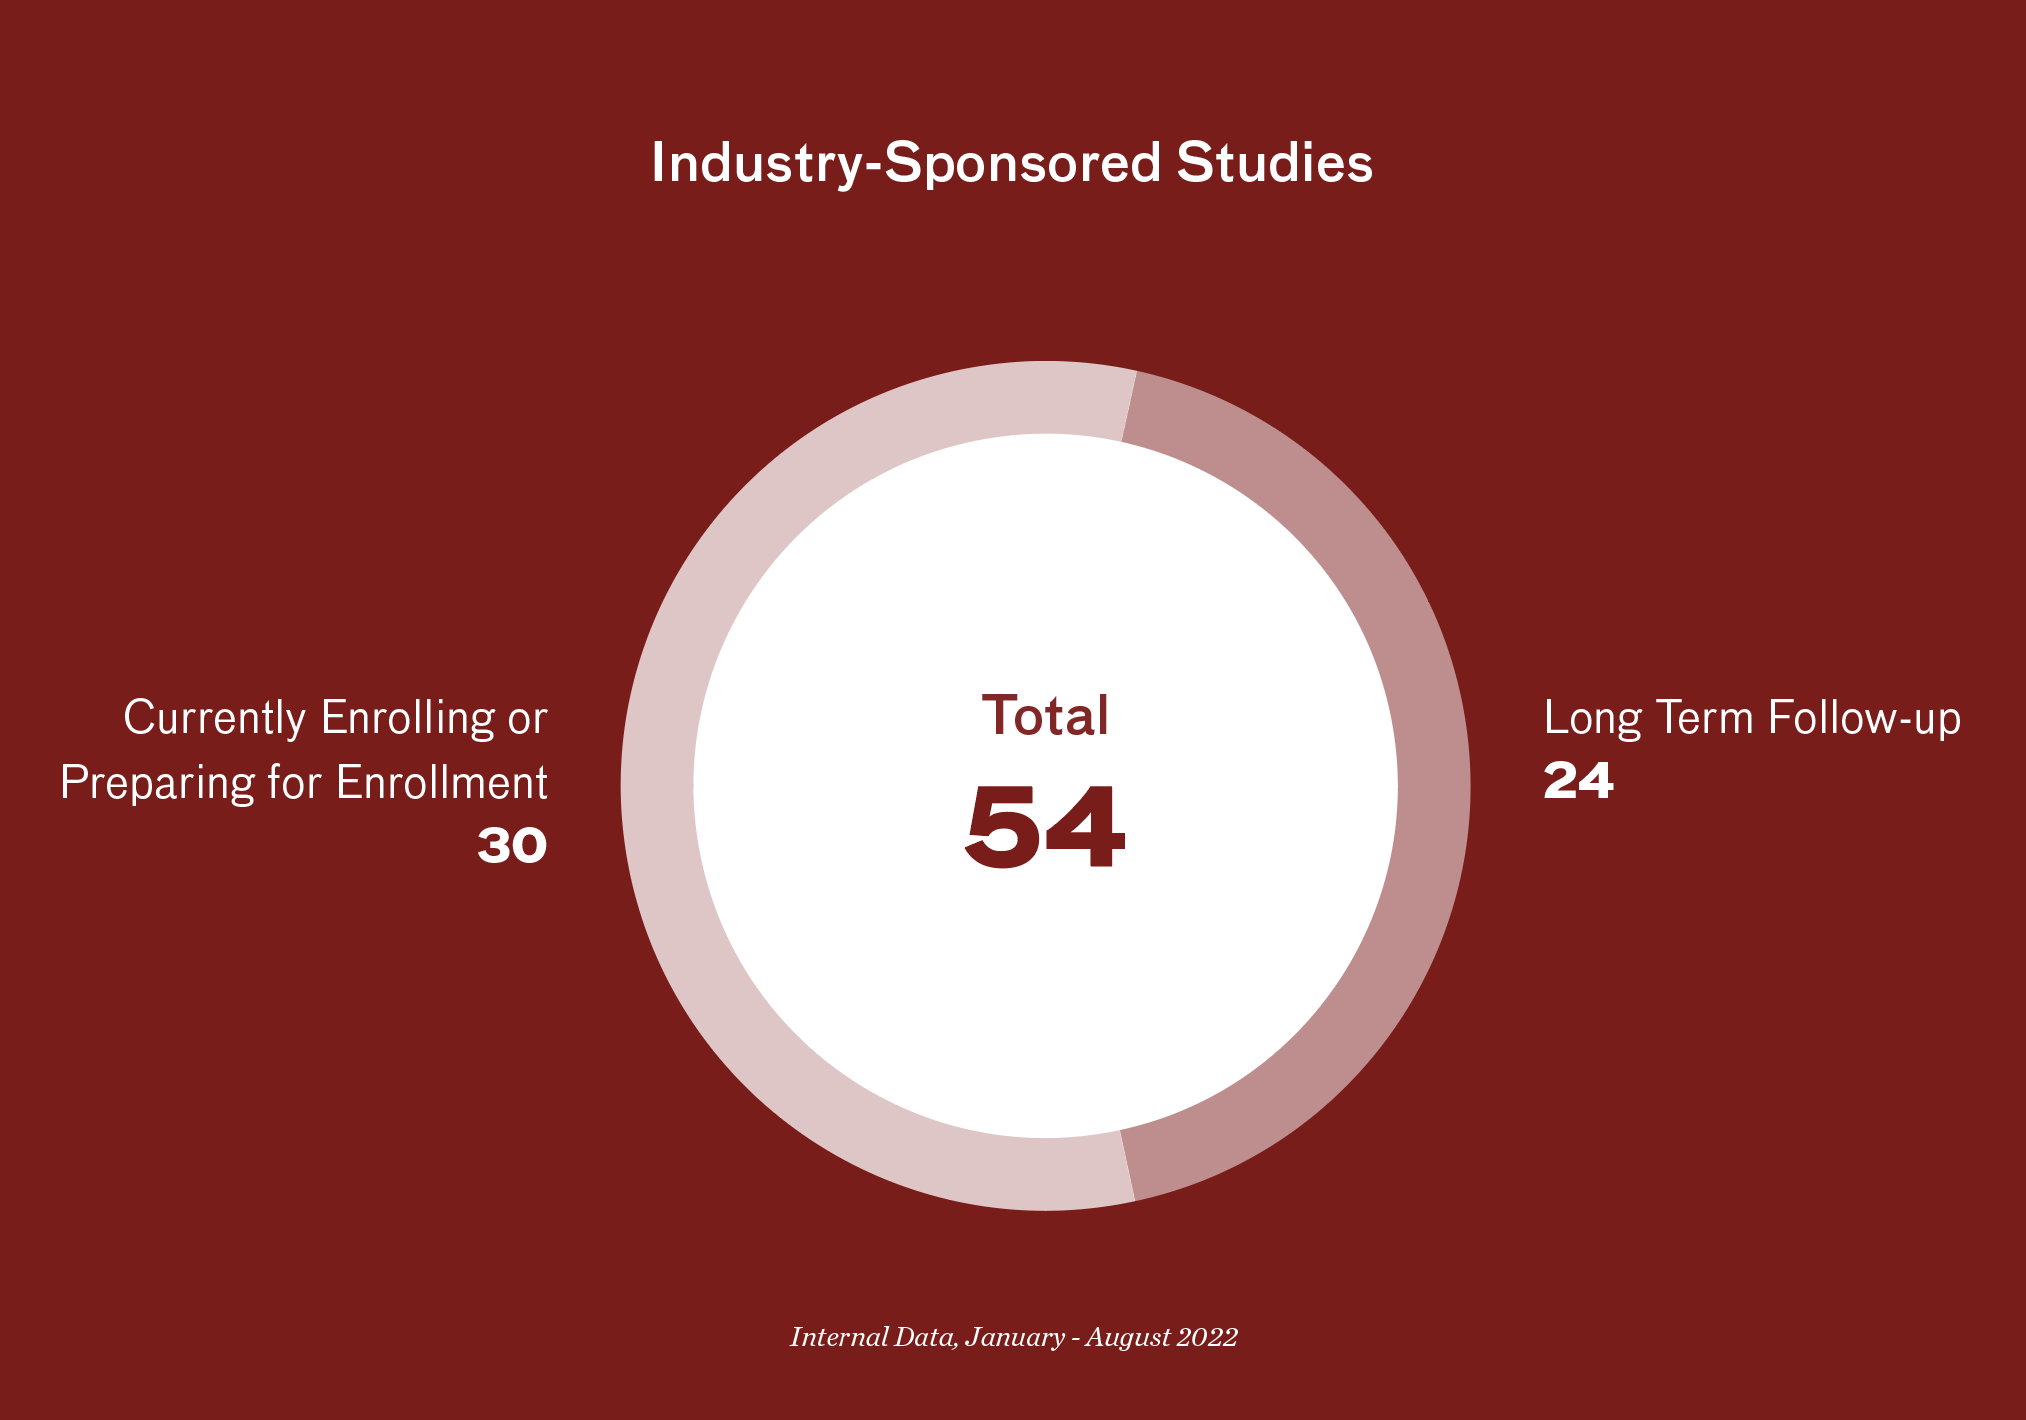 Chart showing Industry-Sponsored Studies: Total of 54, including 30 currently enrolling or preparing for nnrollment, and 24 long term follow-up.